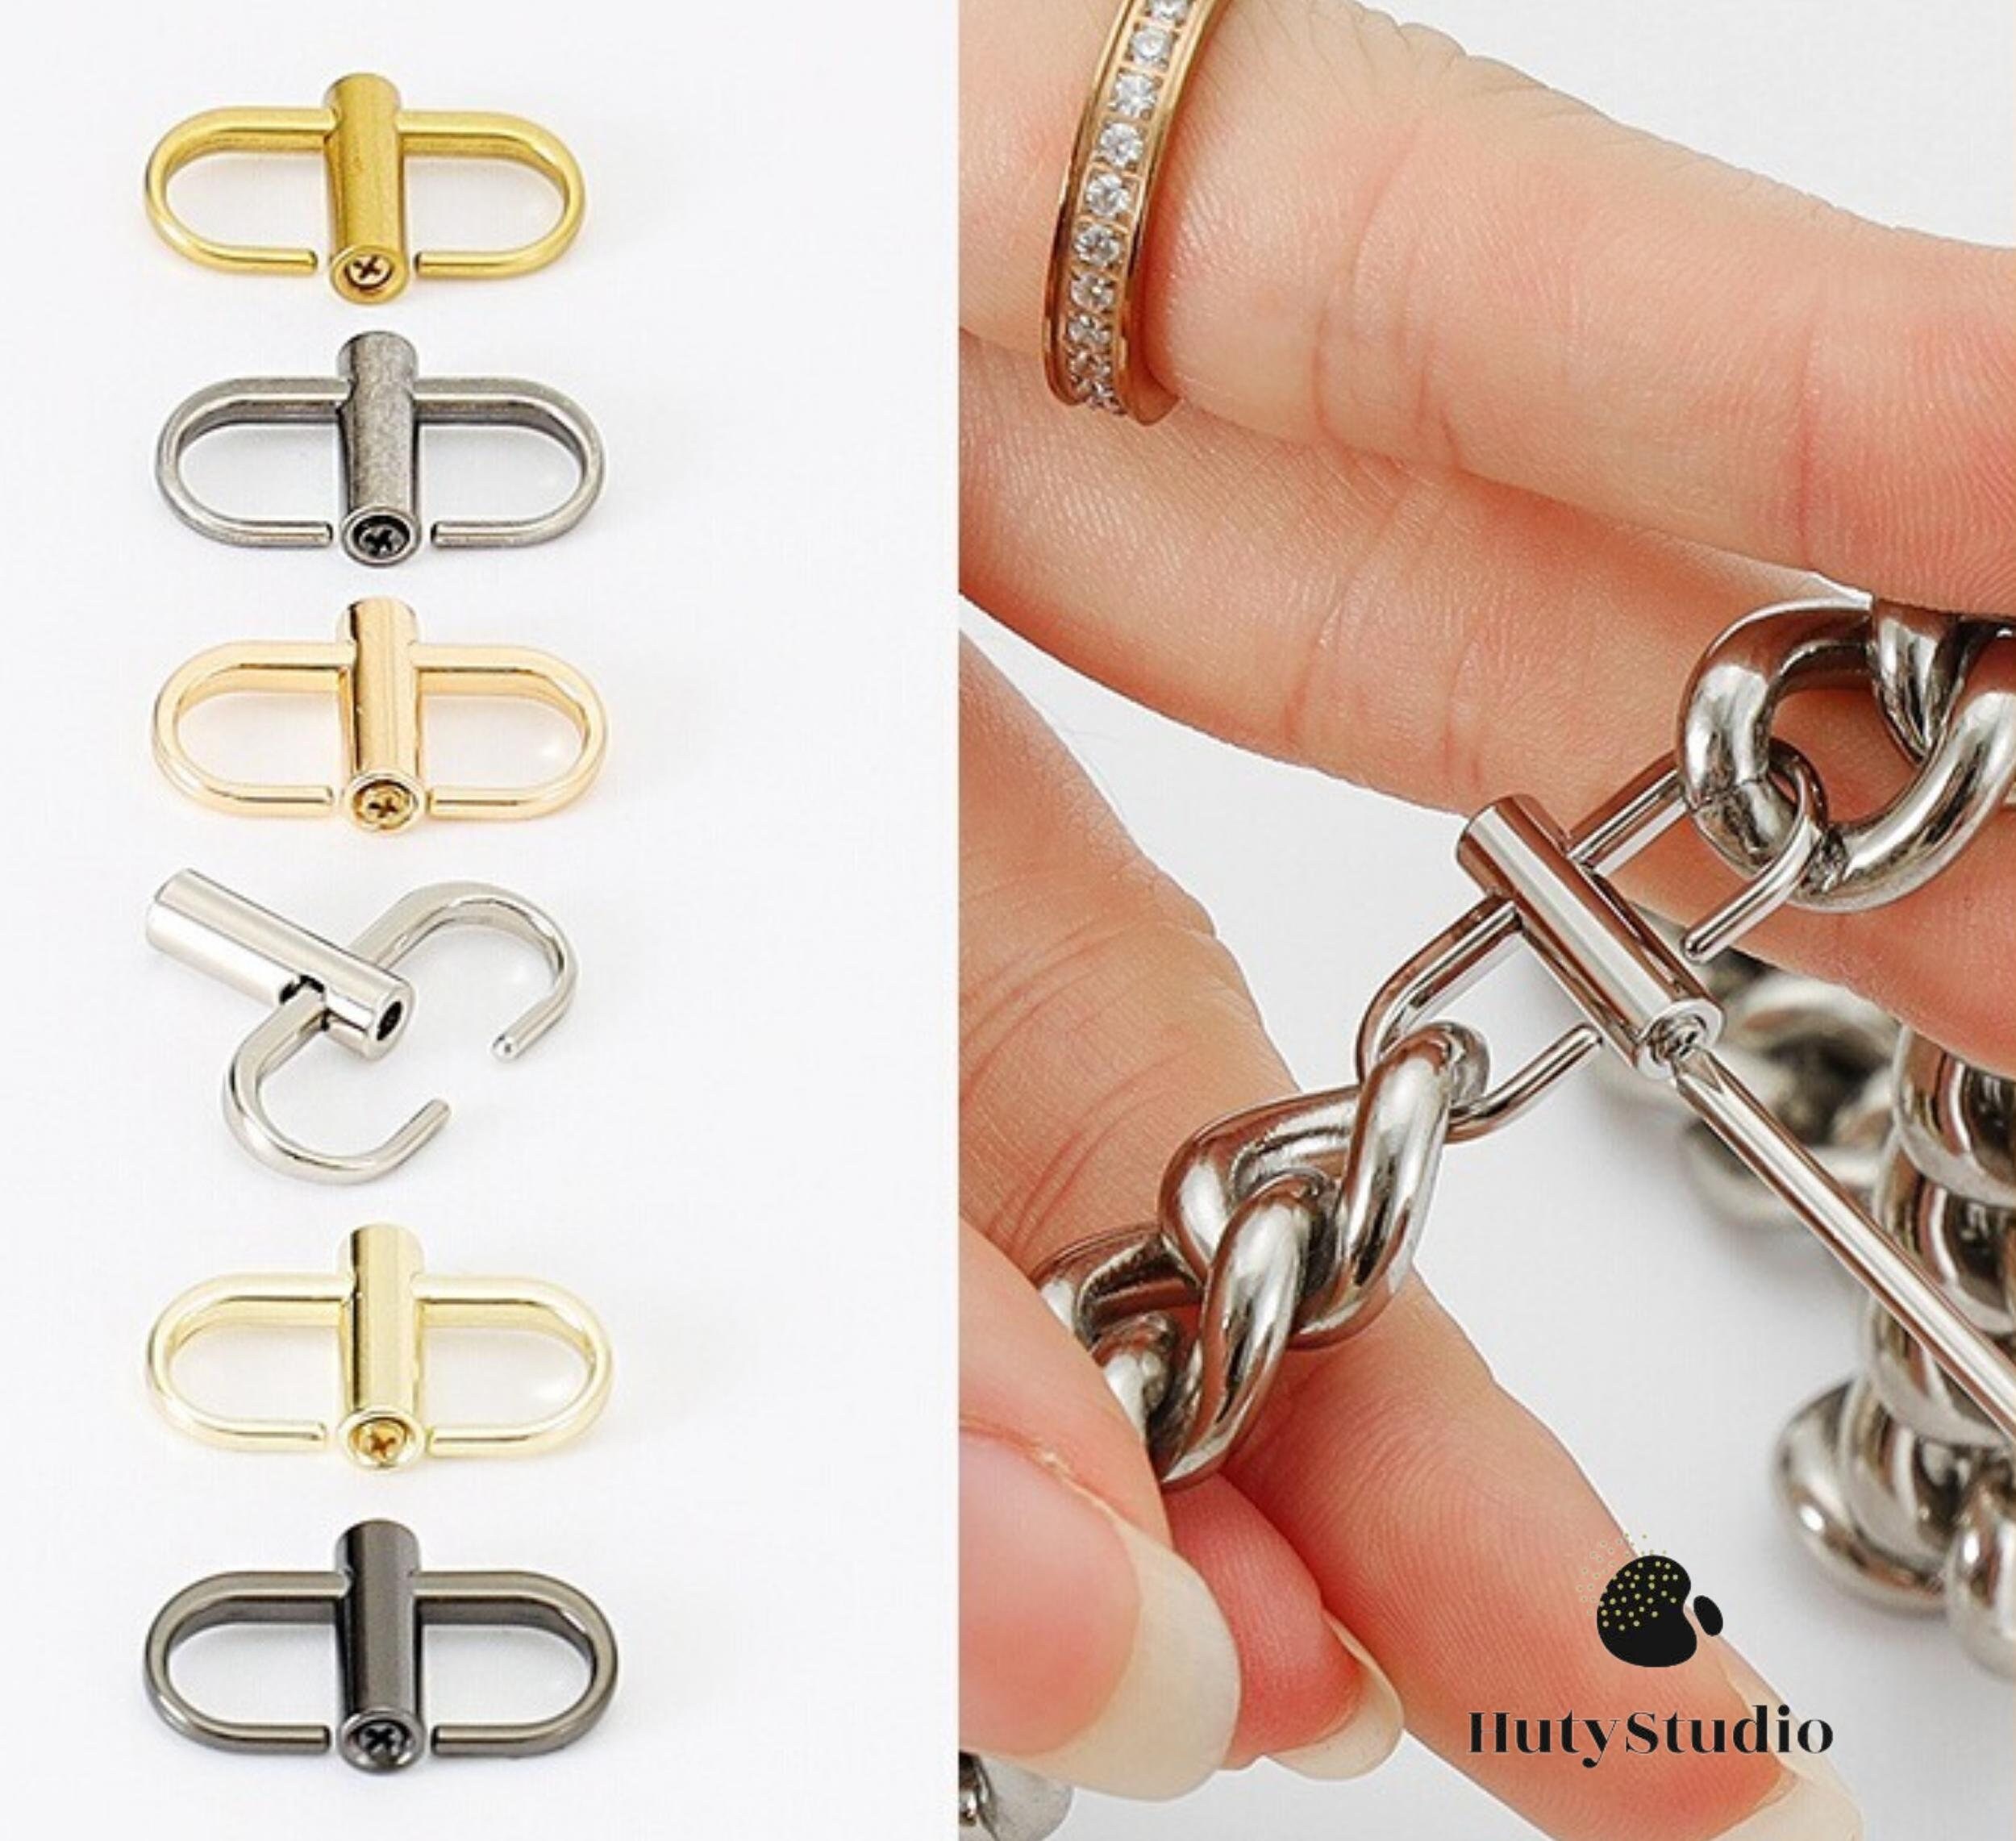 S Type Shape Double Buckle Key Ring Snap Clasp Trigger Hook for Repair  Connect Shorten Leather Bag Shoulder Chain Strap Pendant 6PCS (Silver)